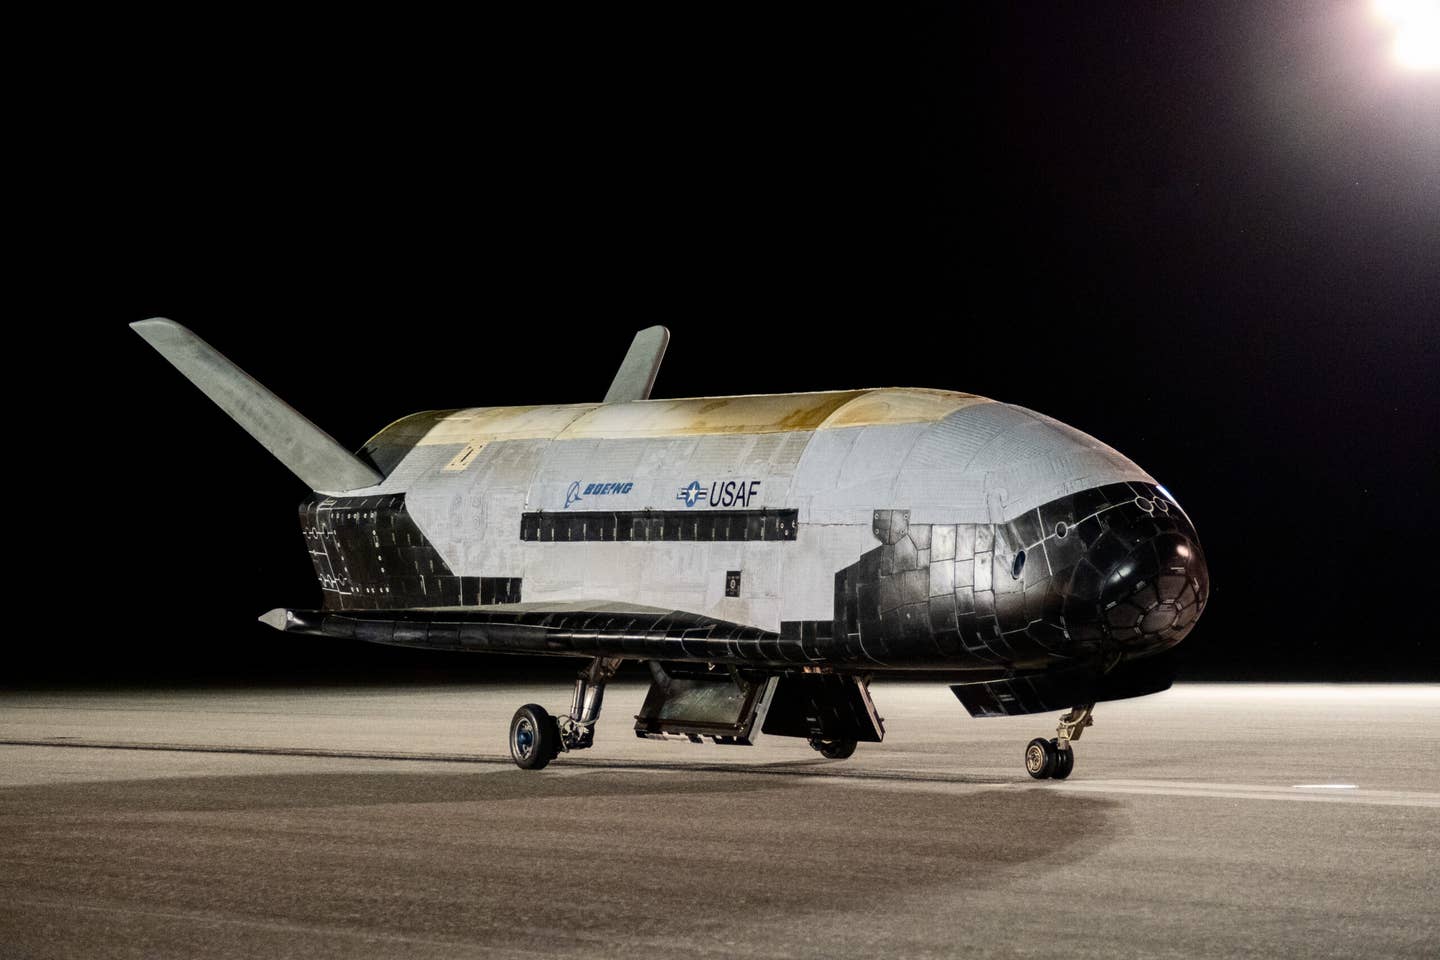 The X-37B Orbital Test Vehicle-6 rests on the flight line at NASA’s Kennedy Space Center, Florida, on November 12, 2022, after it concluded its sixth successful mission that lasted 908 days. <em>U.S. Air Force photo by Staff Sgt. Adam Shank</em>